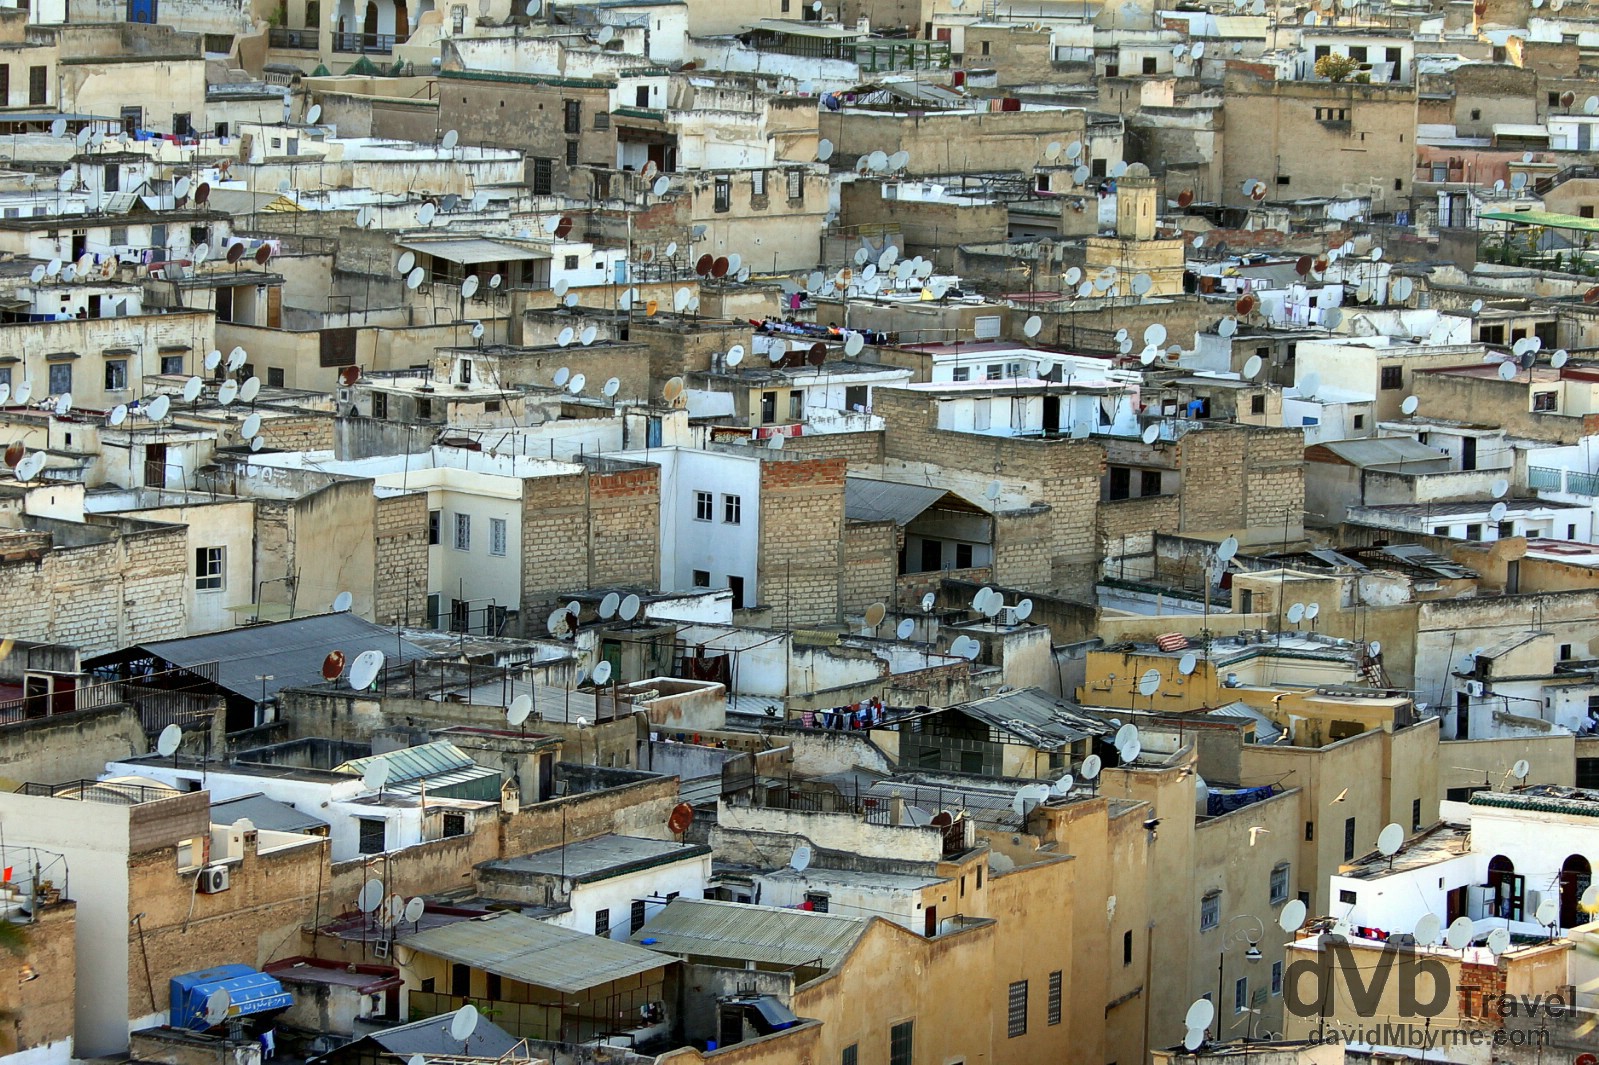 Contrast - satellite dishes on the roofs of a section of the ancient medina of Fes el Bali (Old Fes) as seen from Borj Sud (South Tower) in Fez, Morocco. May 27th, 2014.